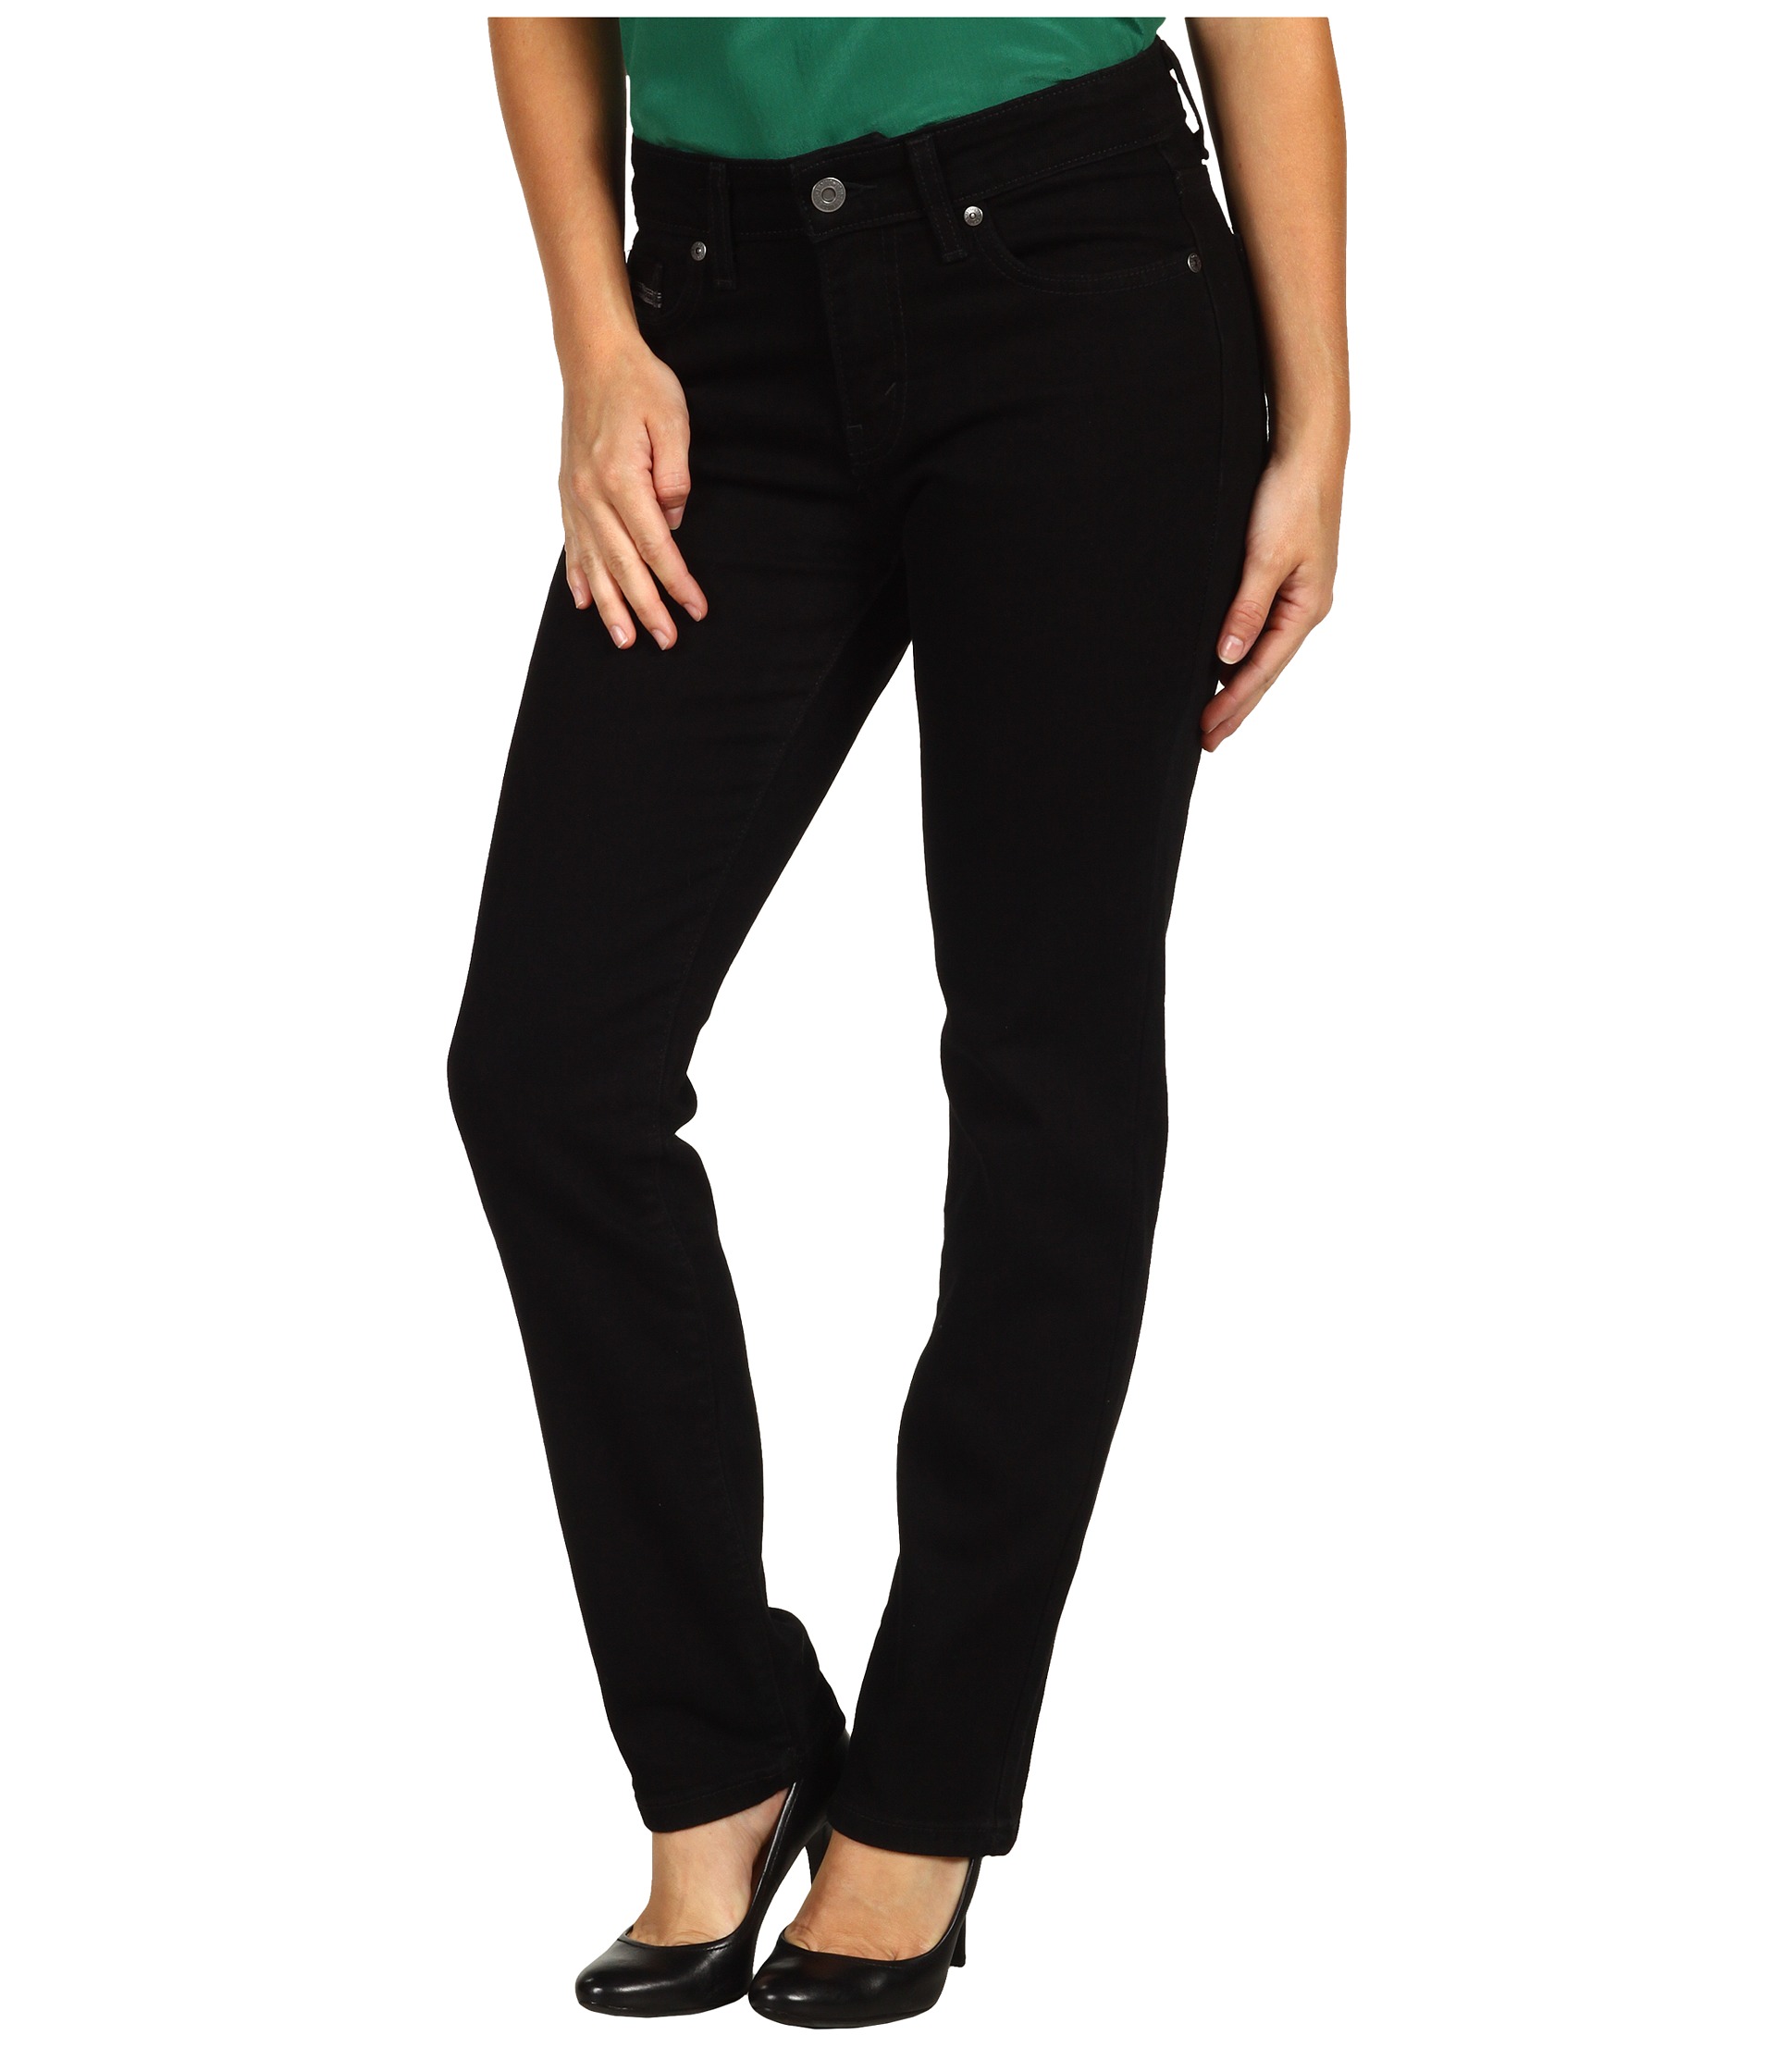 Levis Petites Petite Mid Rise Skinny Jean | Shipped Free at Zappos